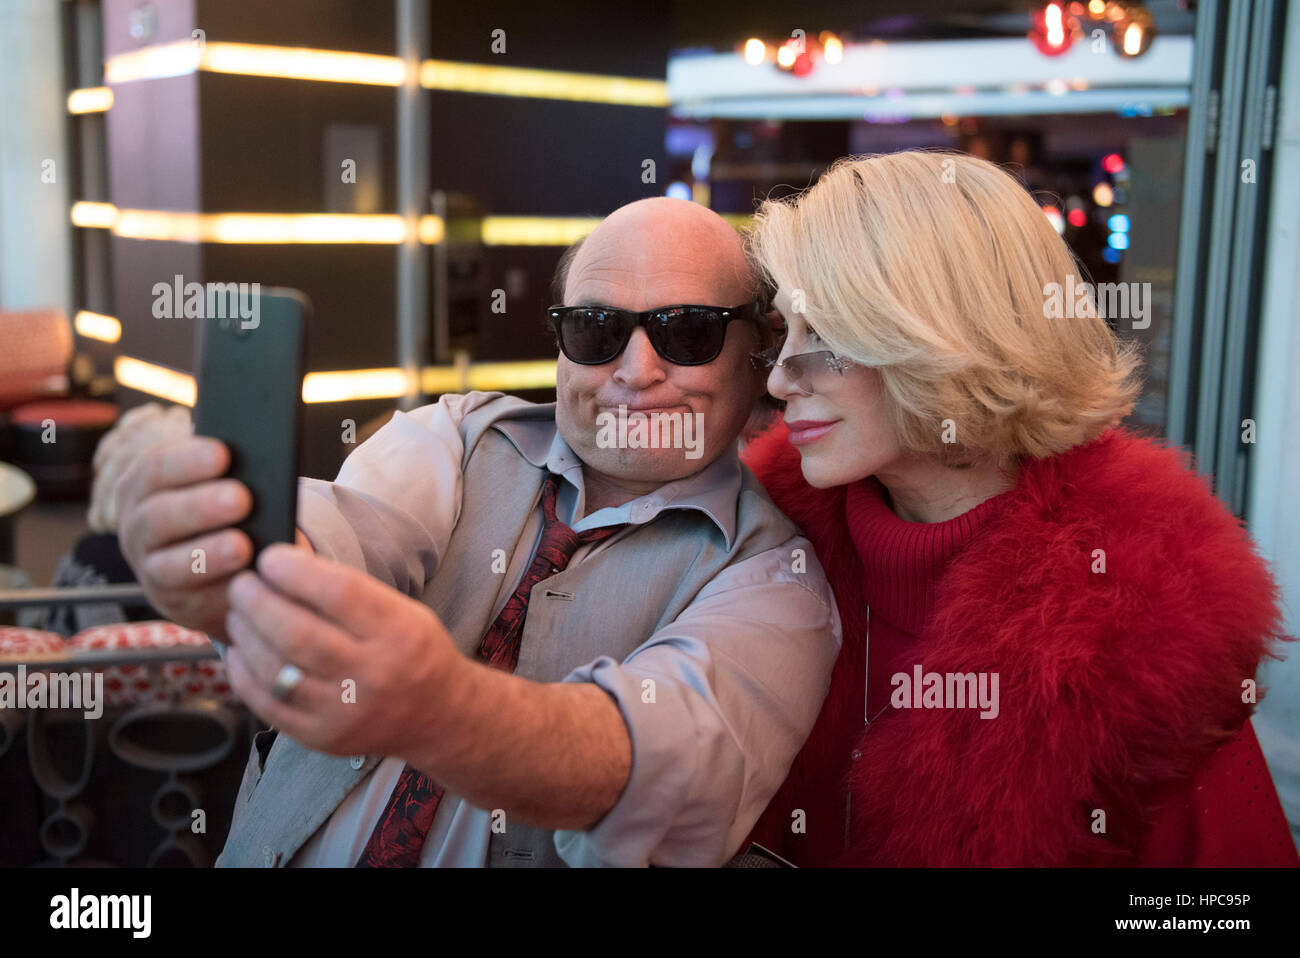 Las Vegas, USA. 20th Feb, 2017.  Danny DeVito impersonator David Shadowens, left, takes a selfie with Joan Rivers impersonator Dee Dee Hanson on the red carpet prior to The Reel Awards at the Golden Nugget Hotel & Casino in Las Vegas, Nev., on February 20, 2017. The awards show is meant to be a humorous tribute to the Academy Awards.  Stock Photo